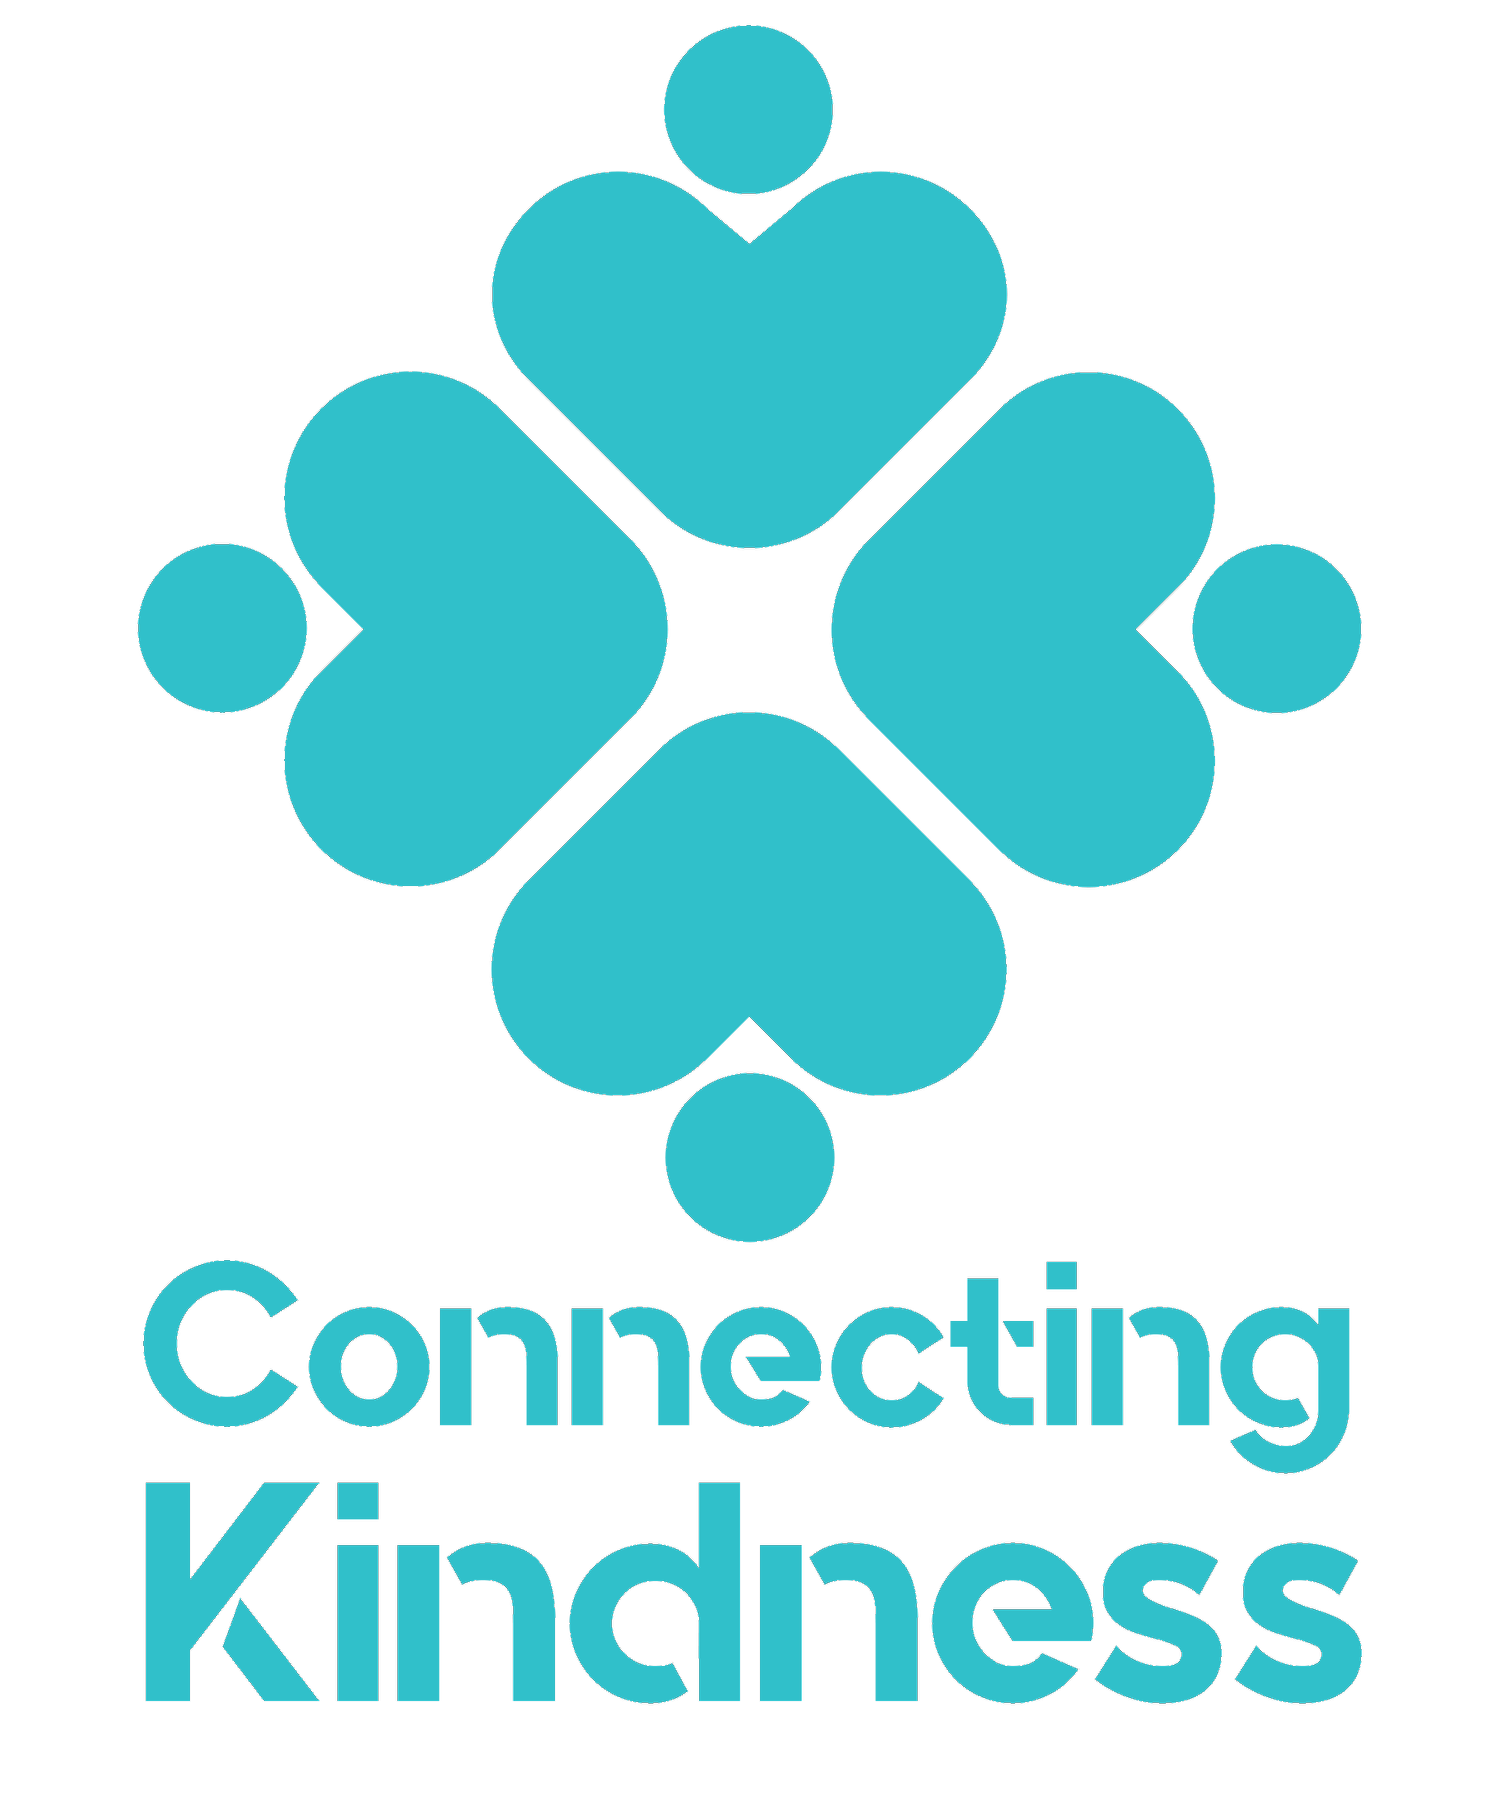 Connecting Kindness